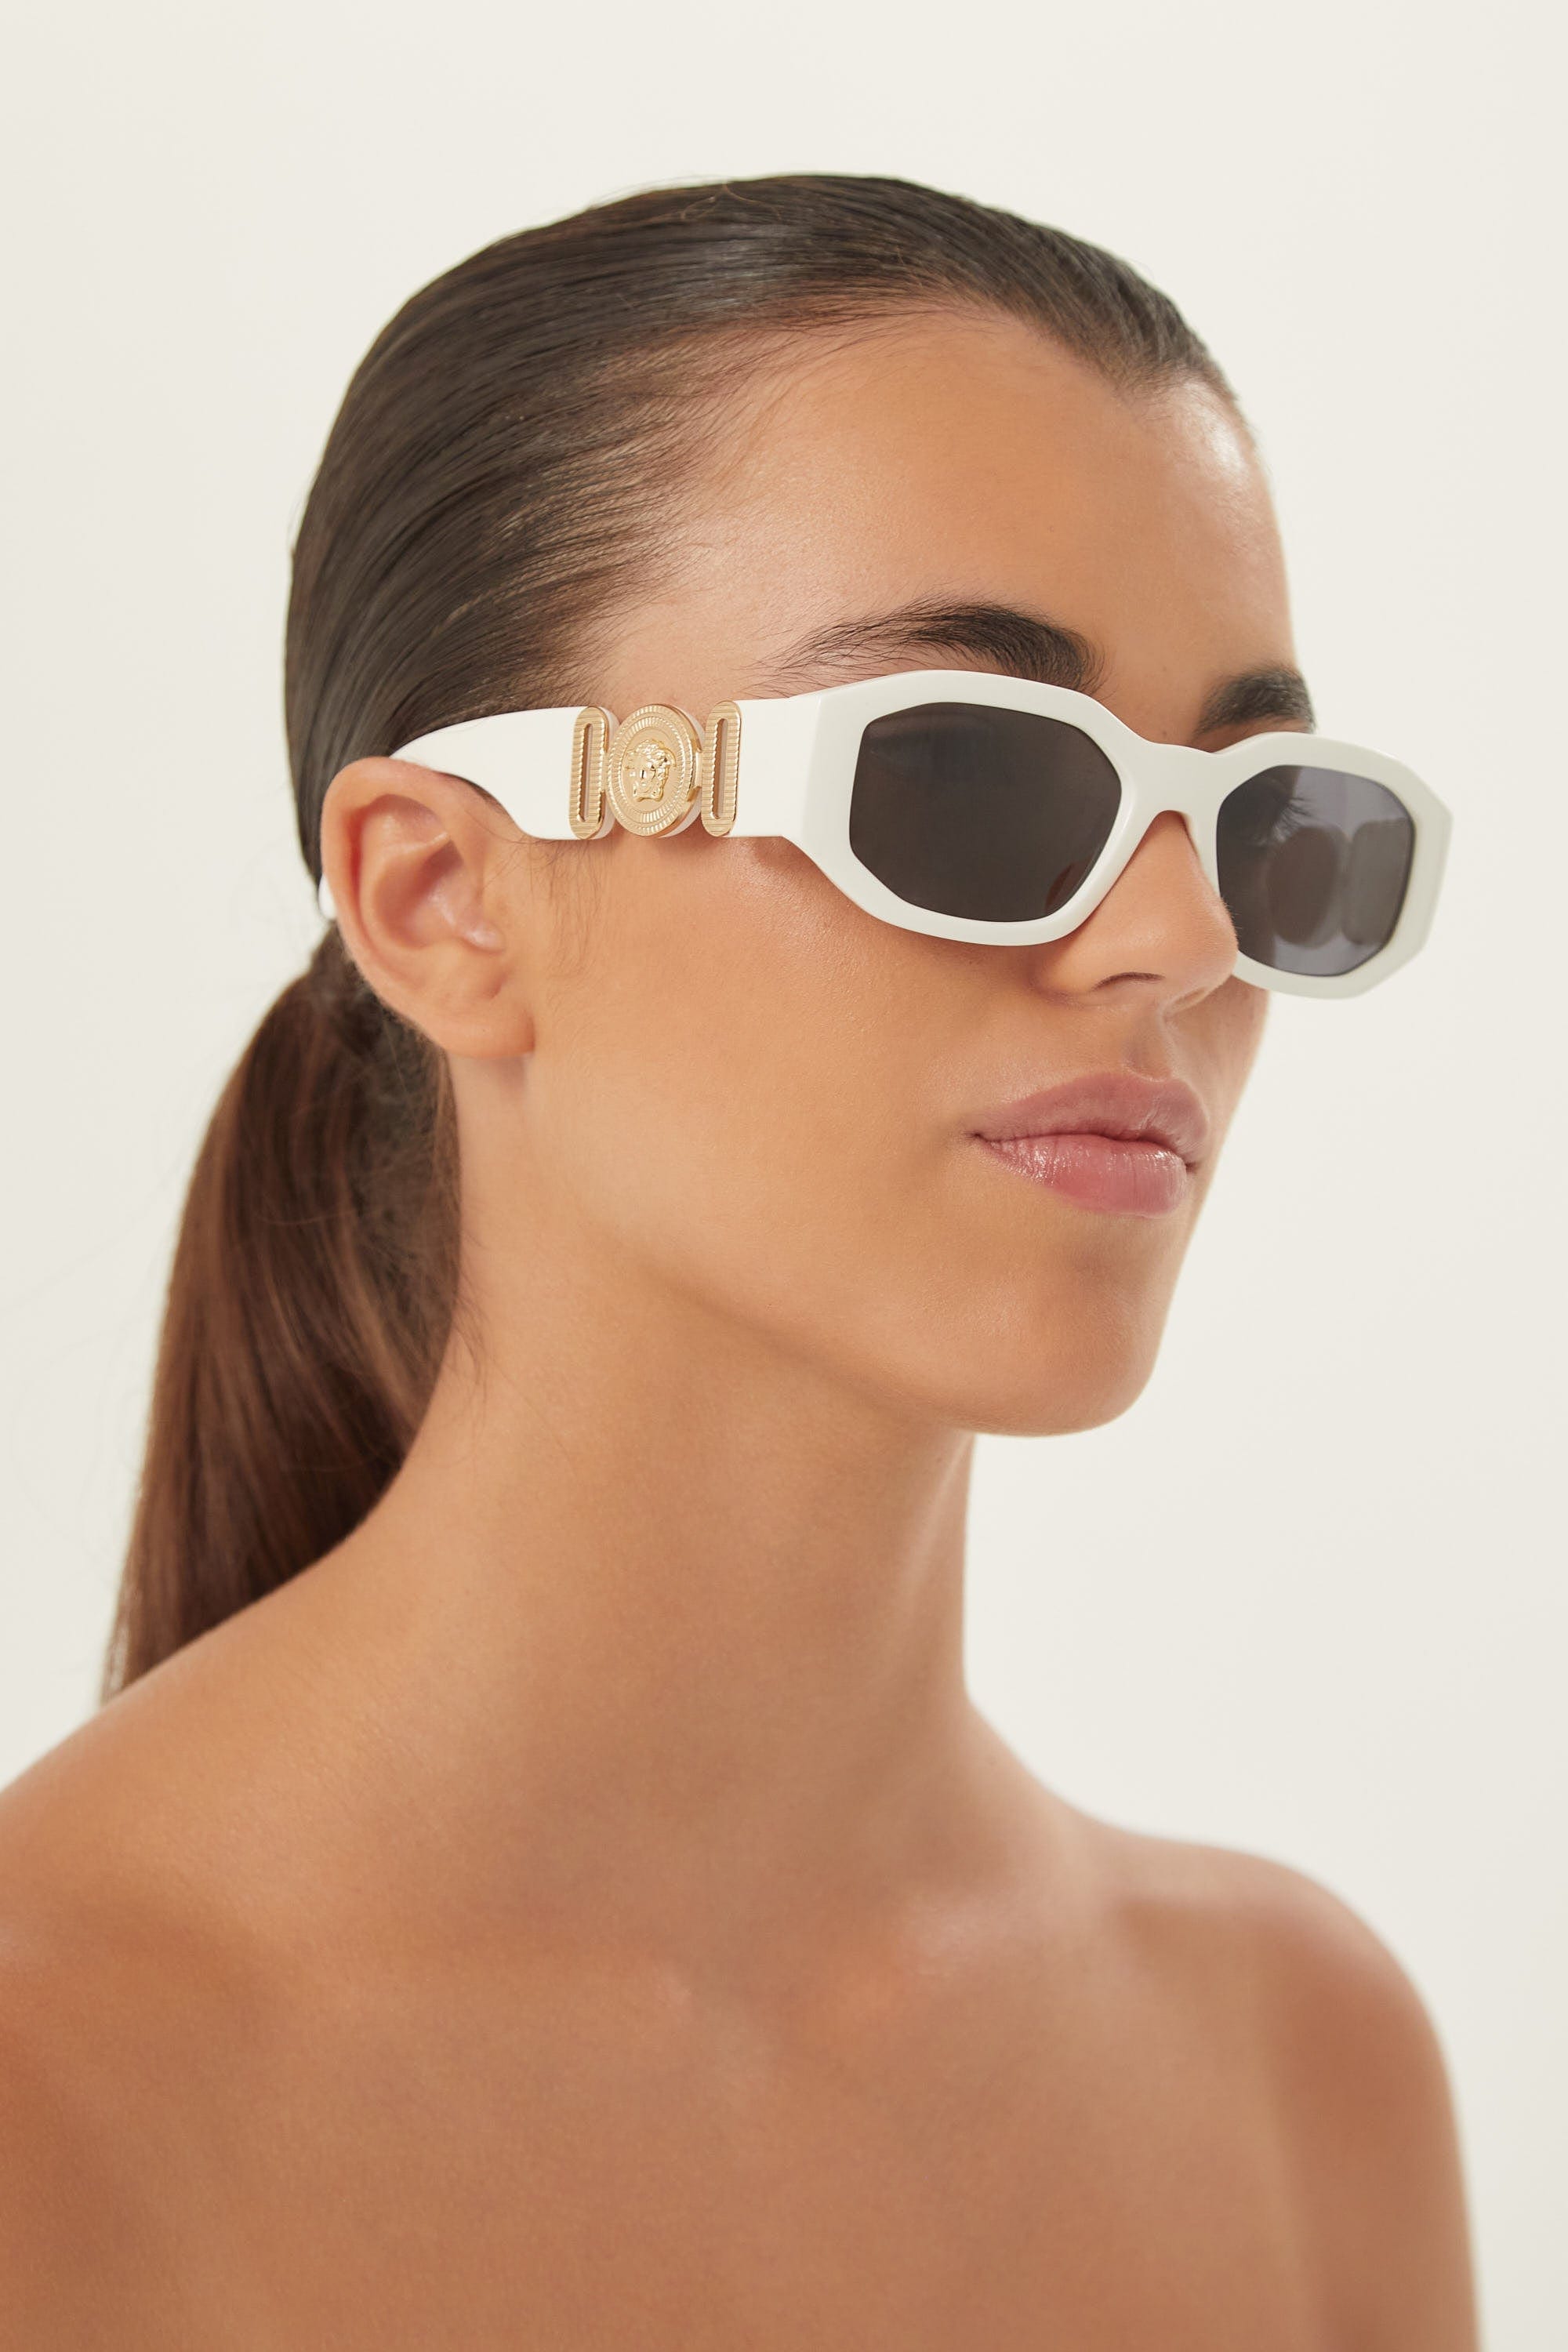 Susteen Min Biscuit Versace biggie sunglasses in white with iconic jellyfish